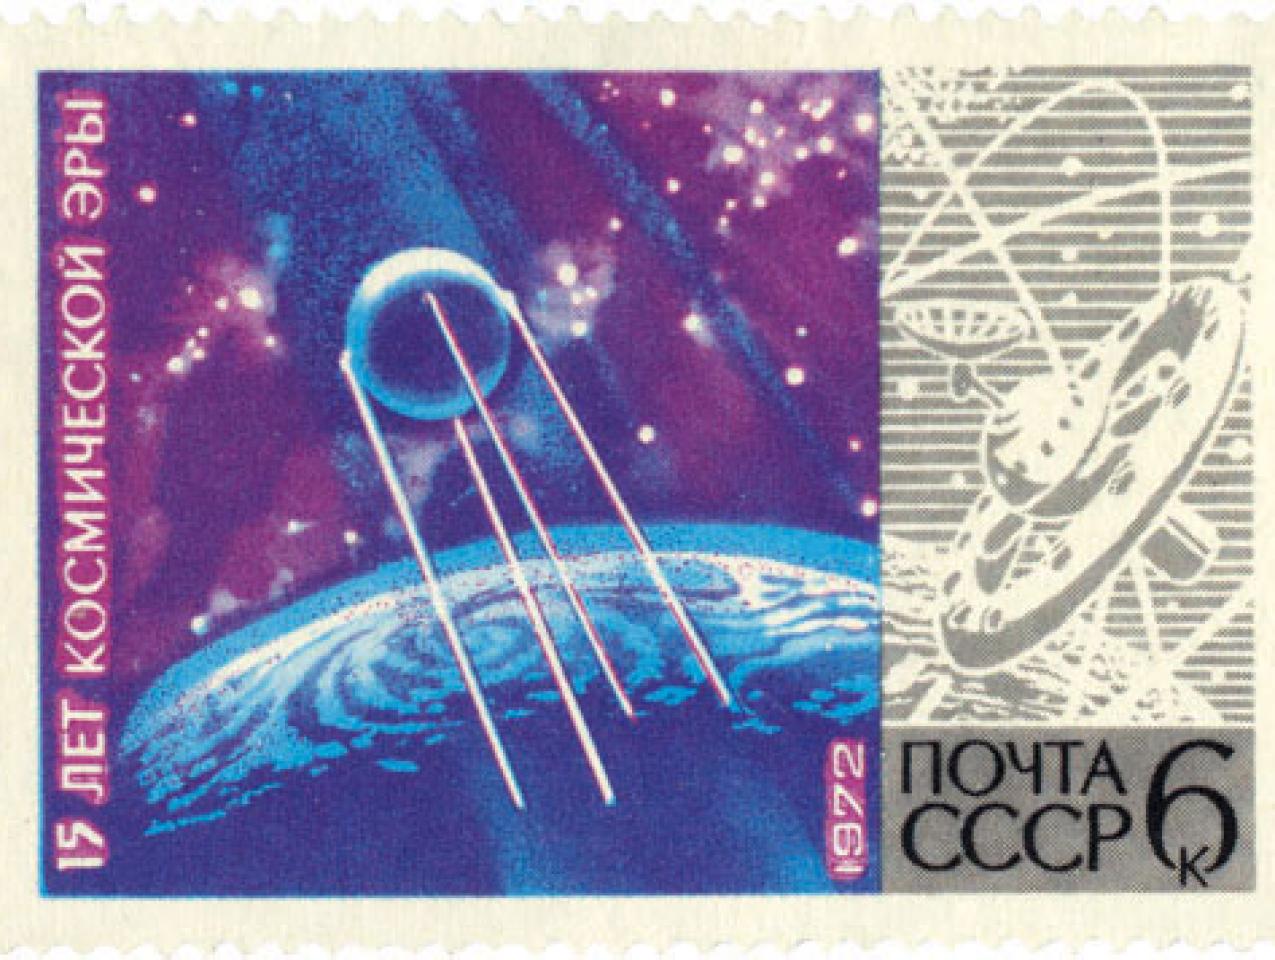 Soviet Union’s launch of the first Sputnik satellite in 1957 stamp